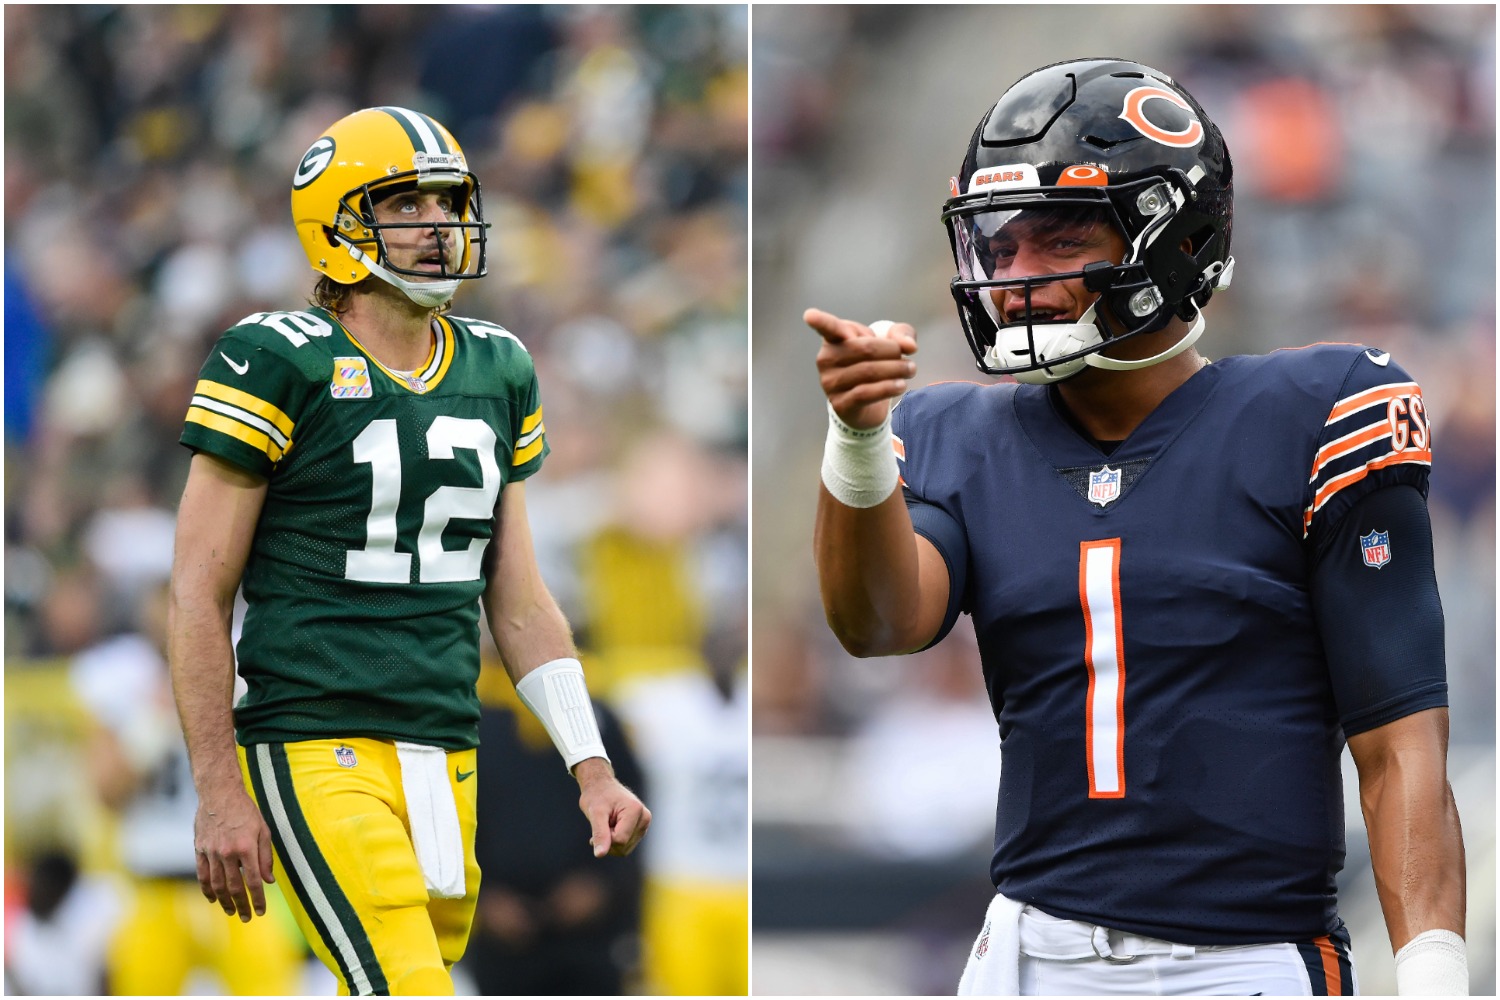 Green Bay Packers quarterback Aaron Rodgers looks on during a game as Chicago Bears QB Justin Fields points to the sideline after a play.